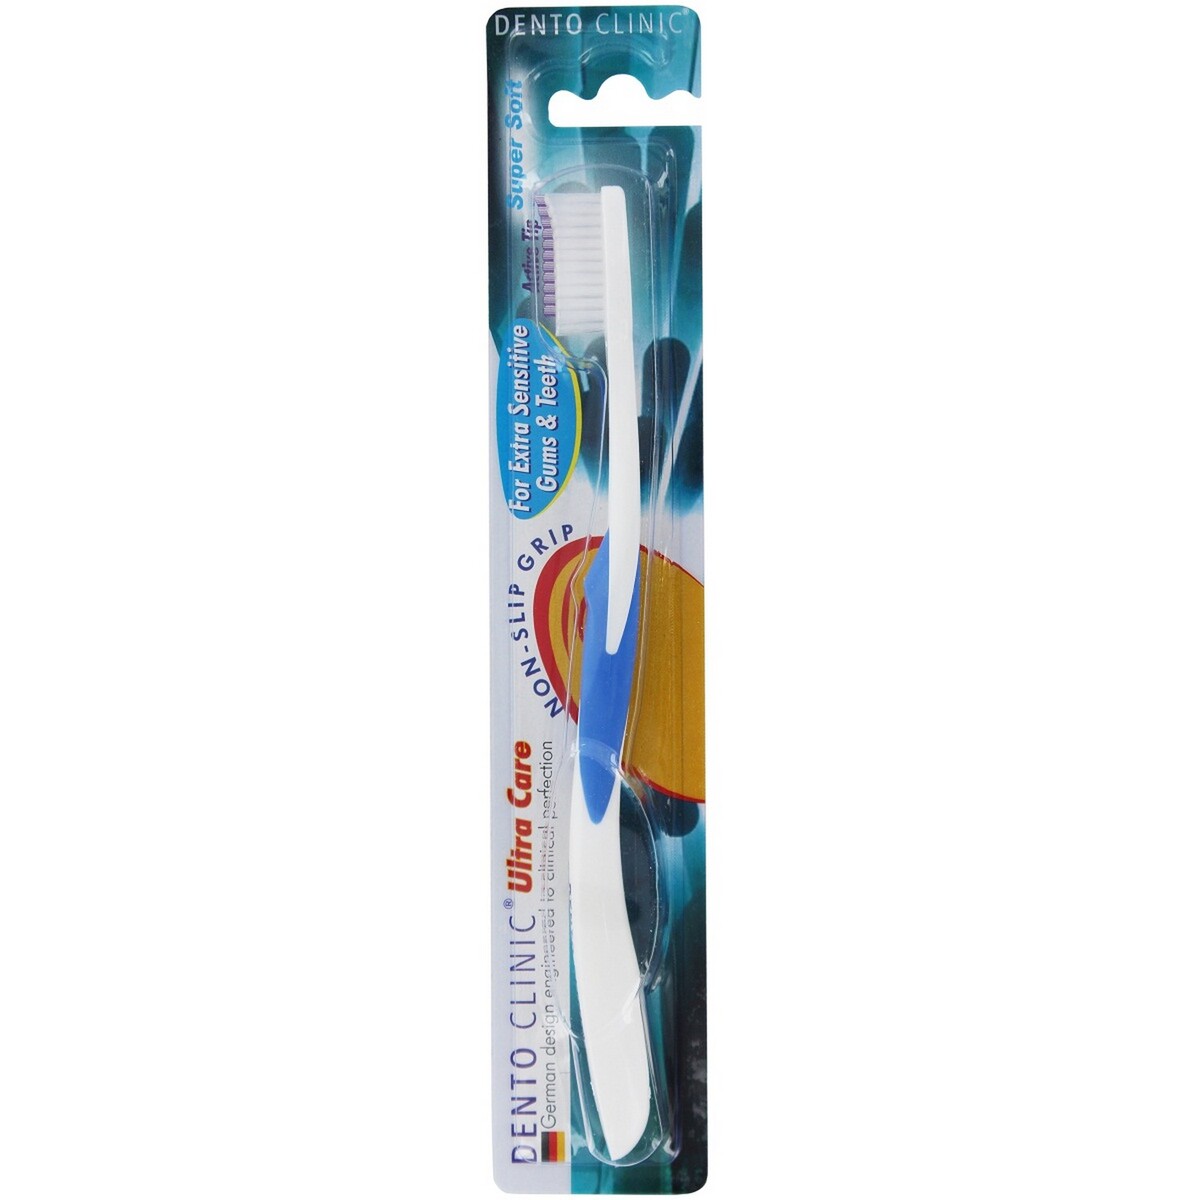 Dento Clinic Toothbrush Ultra Care Super Soft 1's Assorted Colours